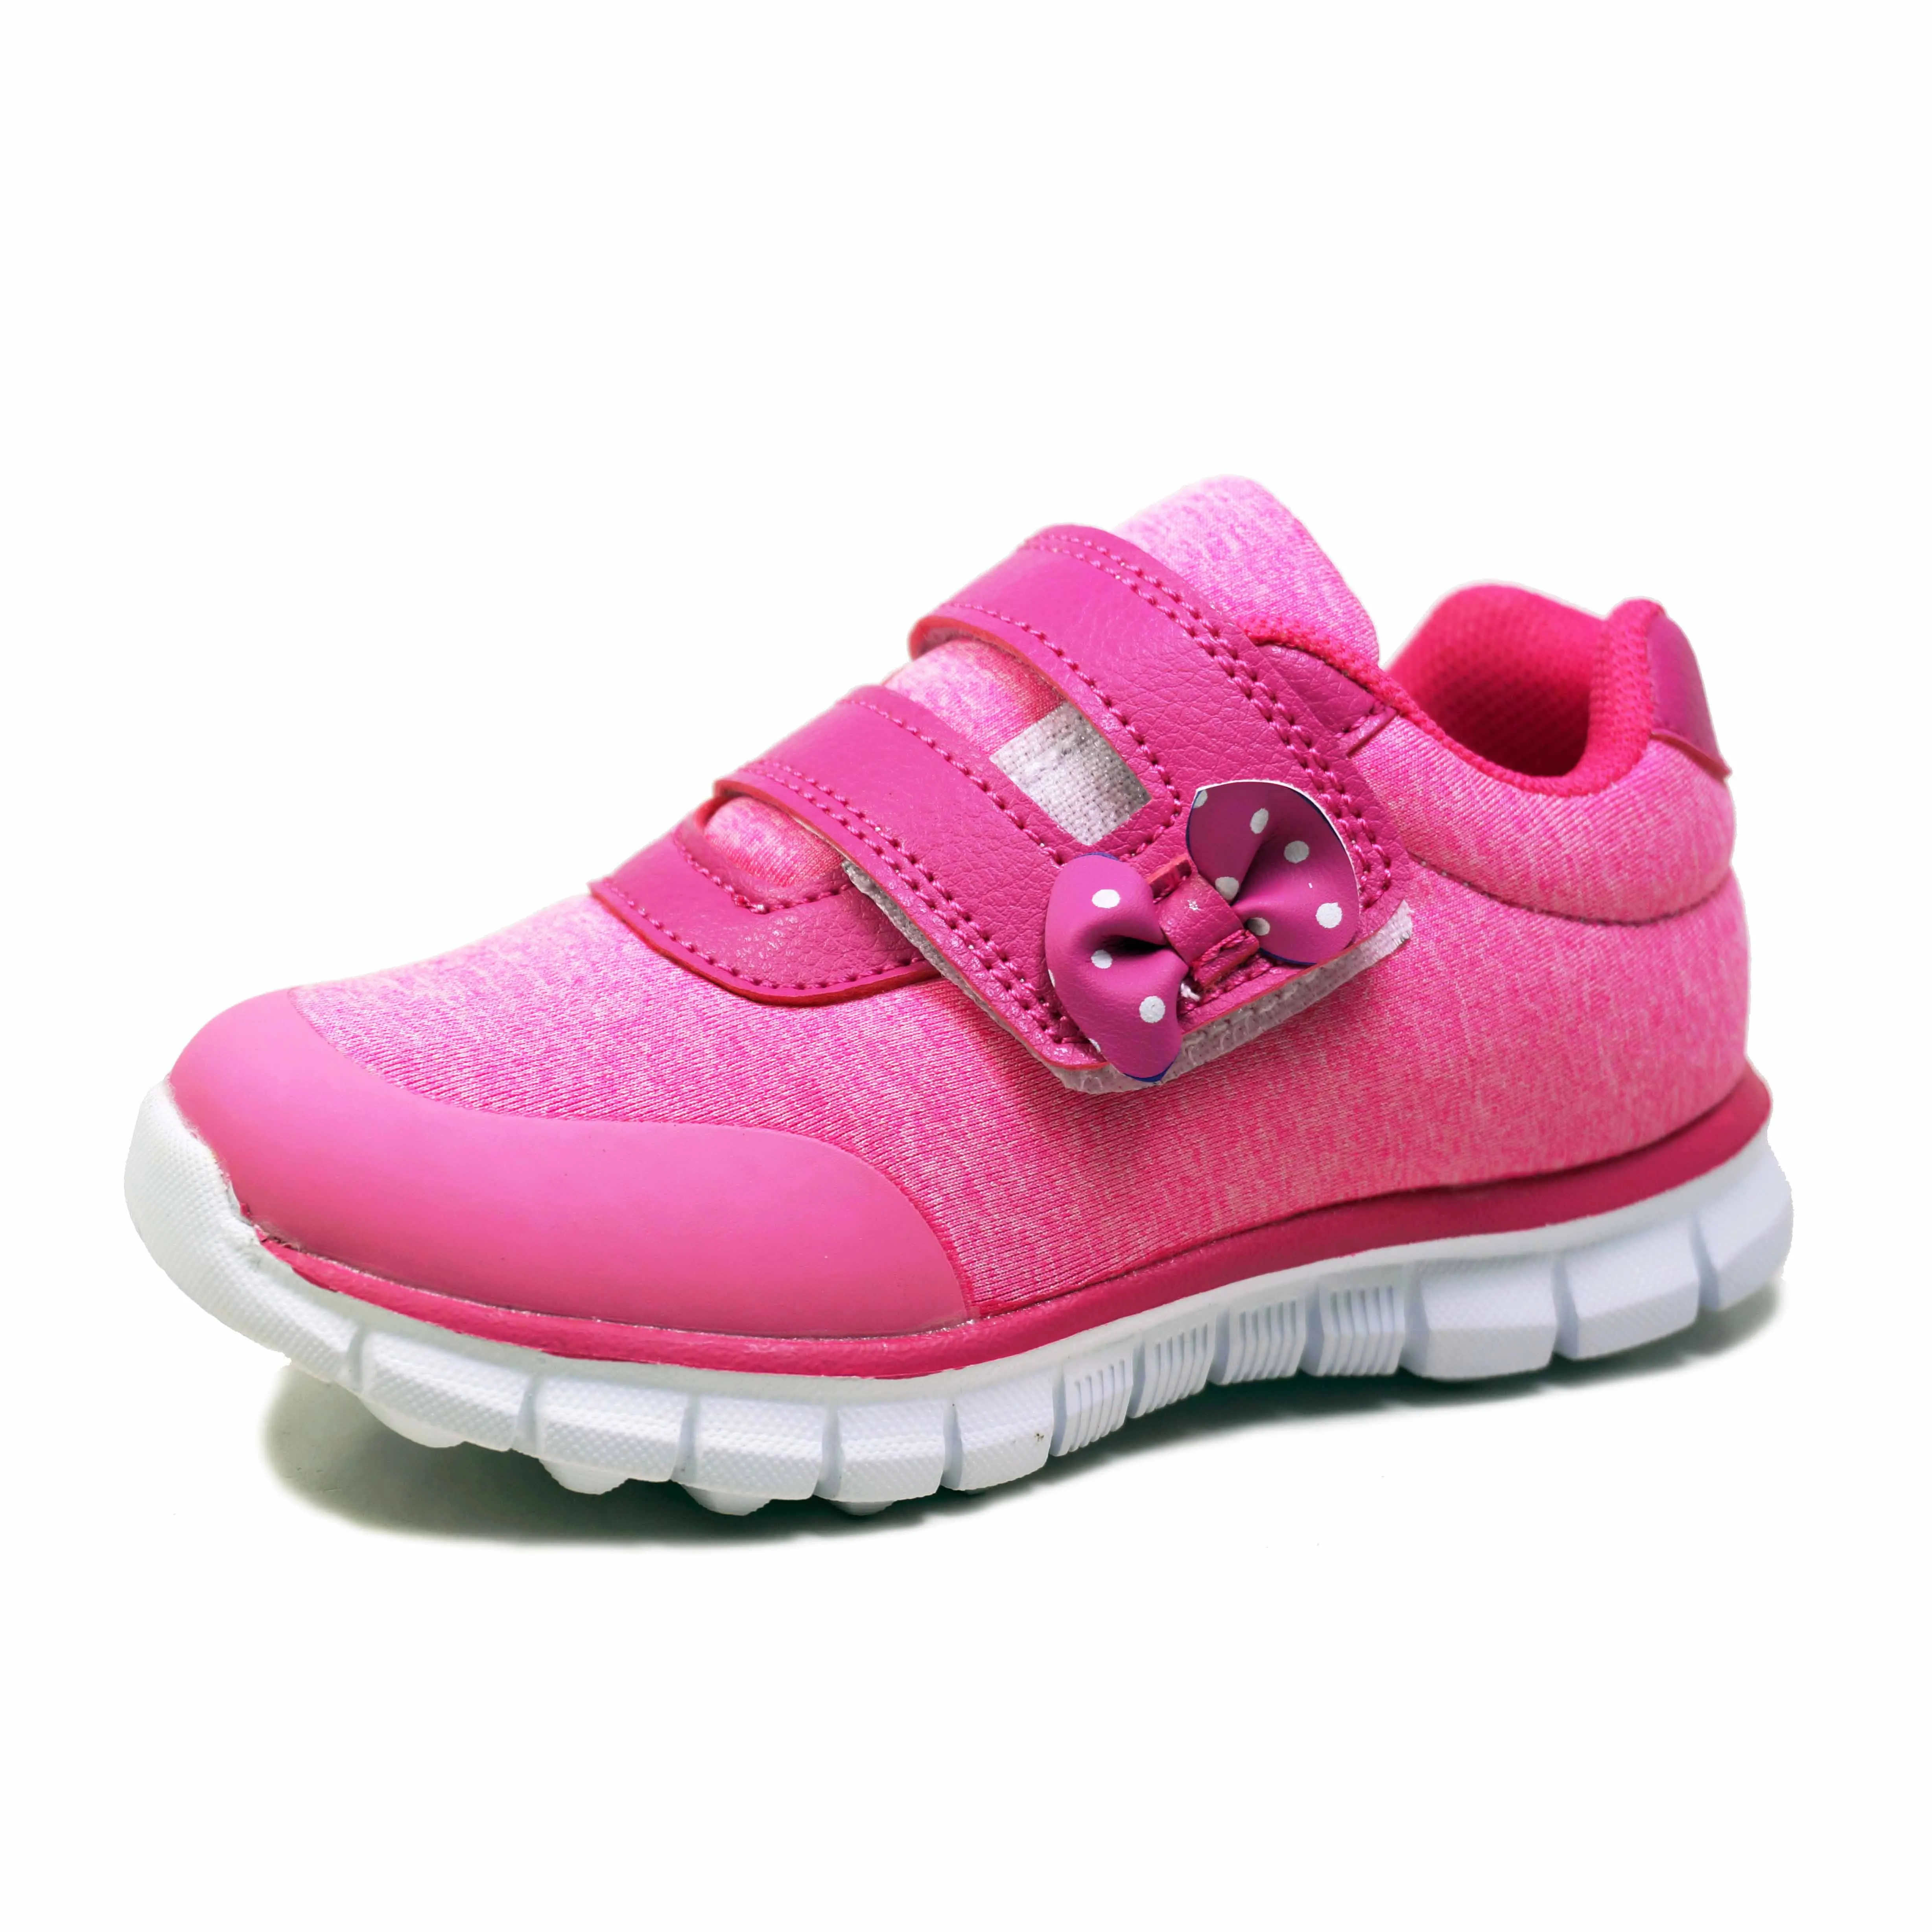 Kids Shoes Boys Sport Shoes Outdoor Girls Shoes Casual Baby Sneakers Size 23-28 